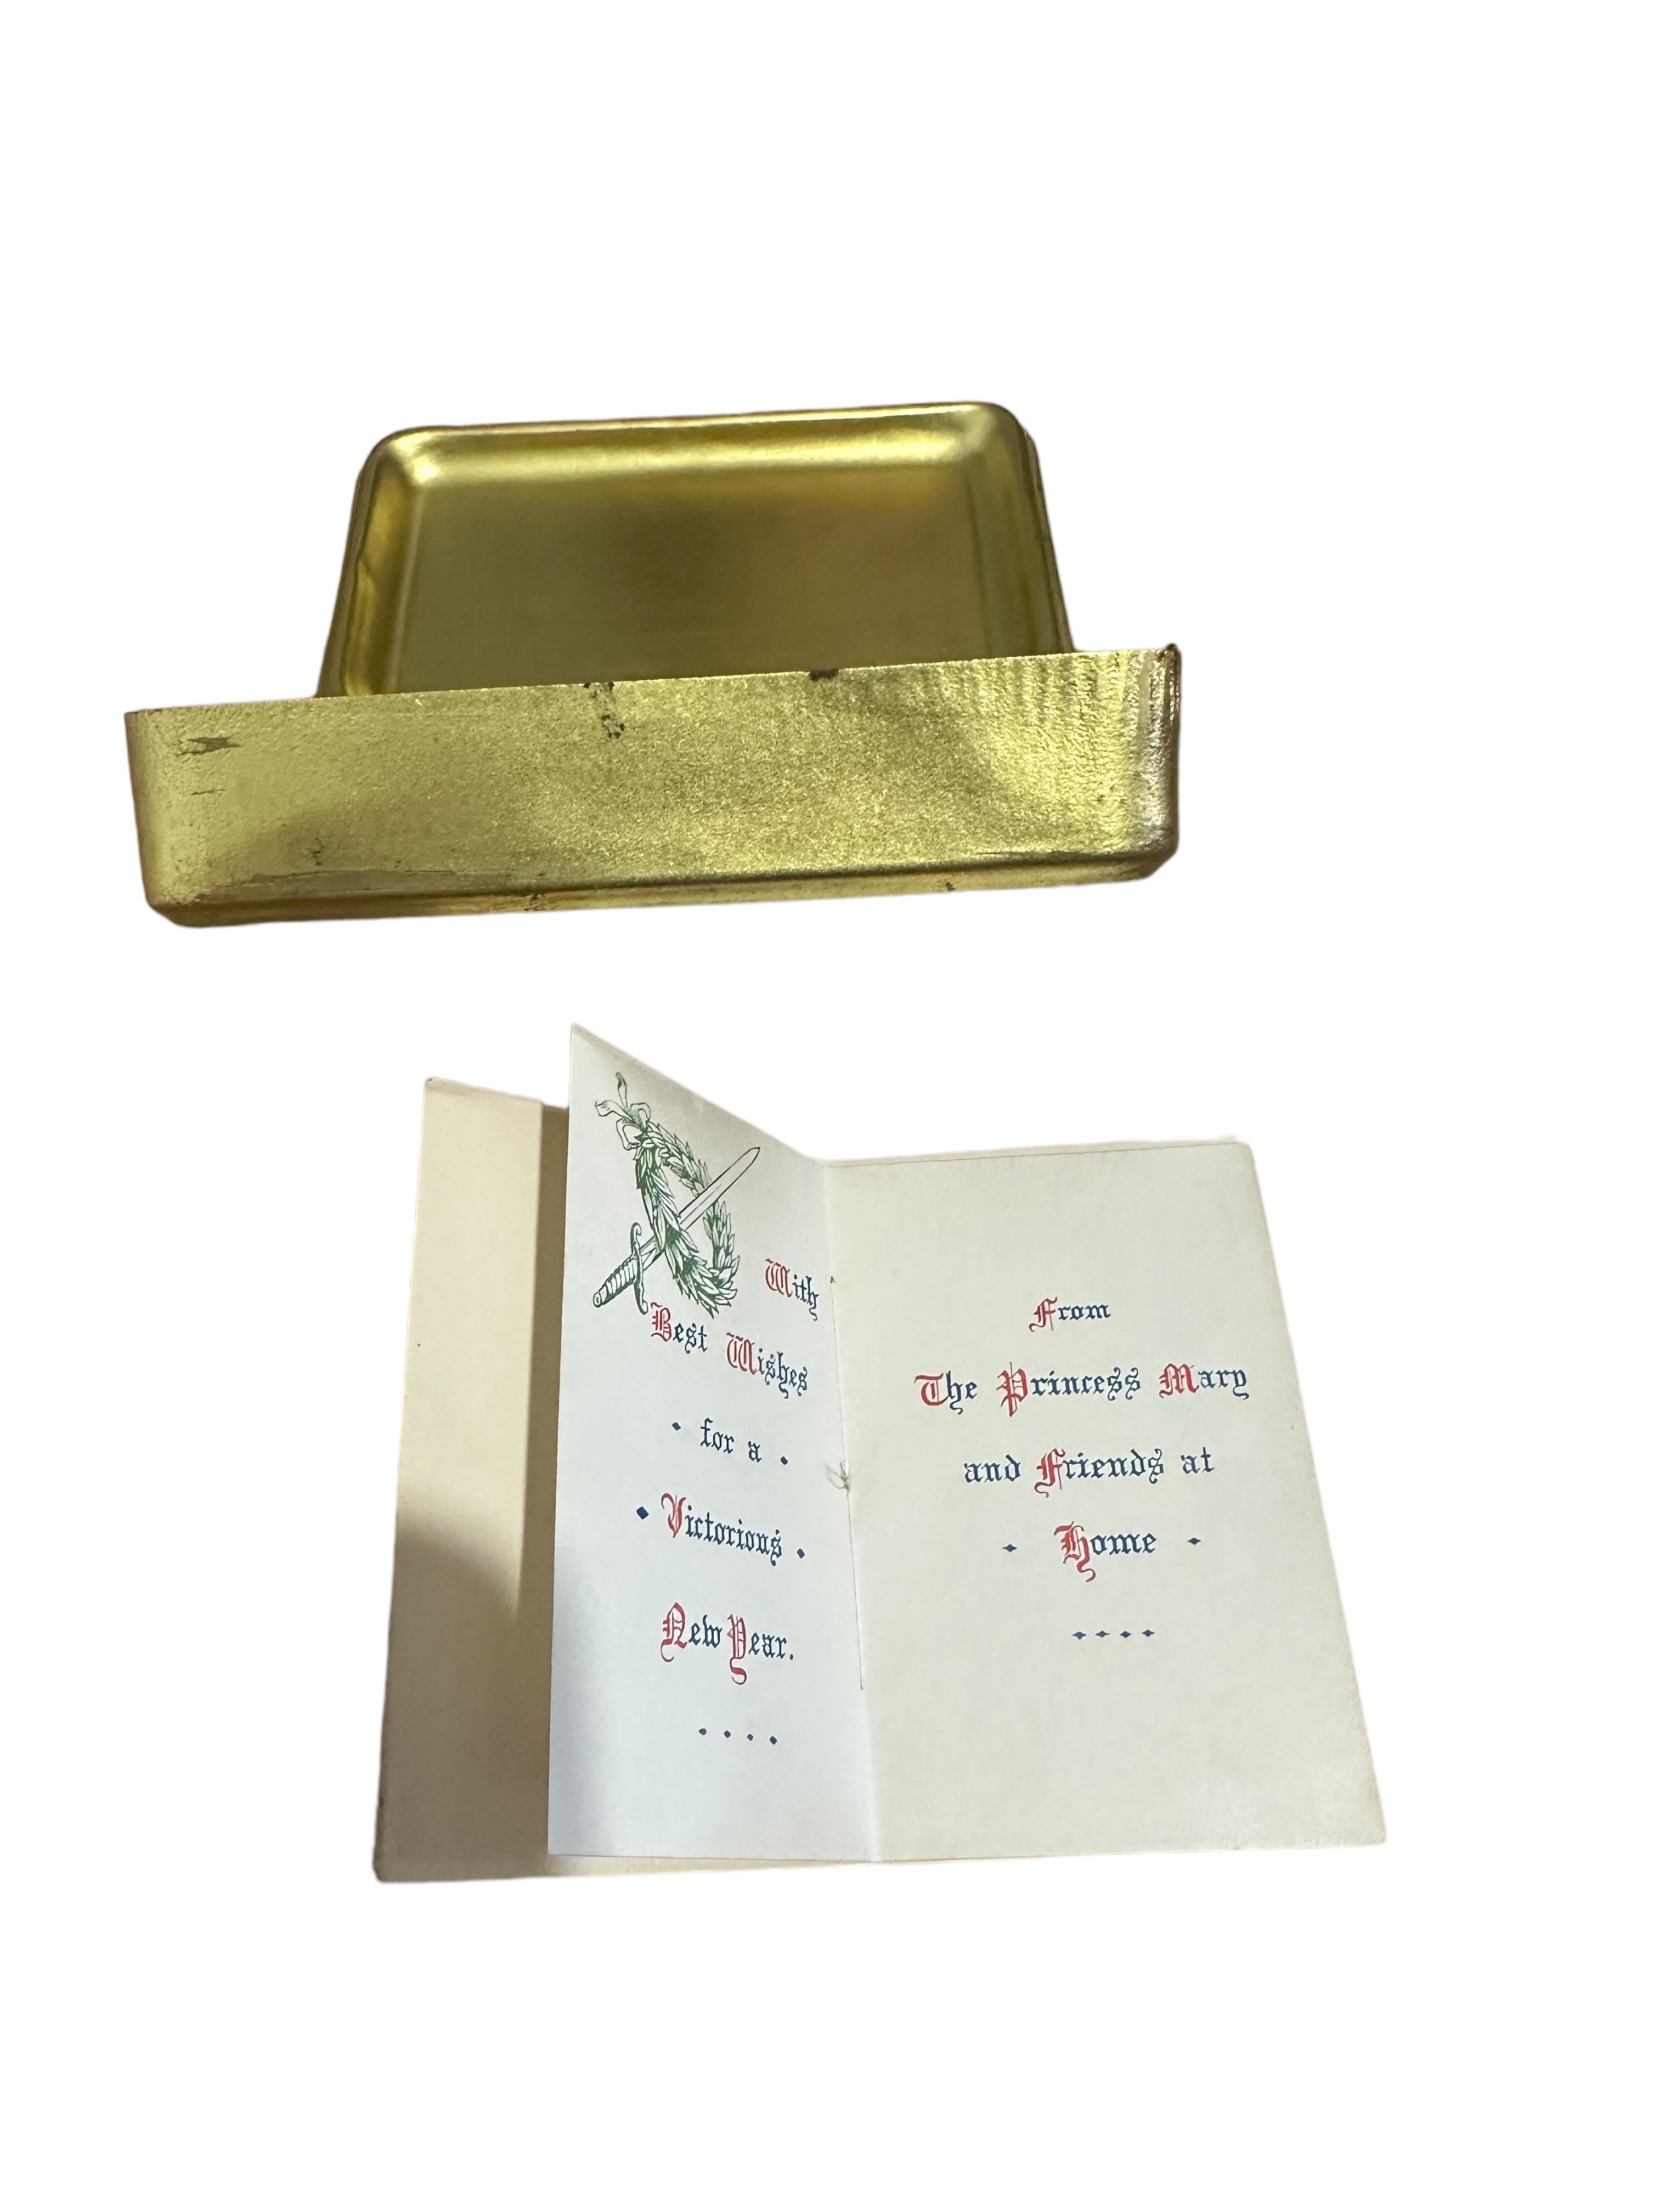 World War One Princess Mary Tin with Card. - Image 4 of 8